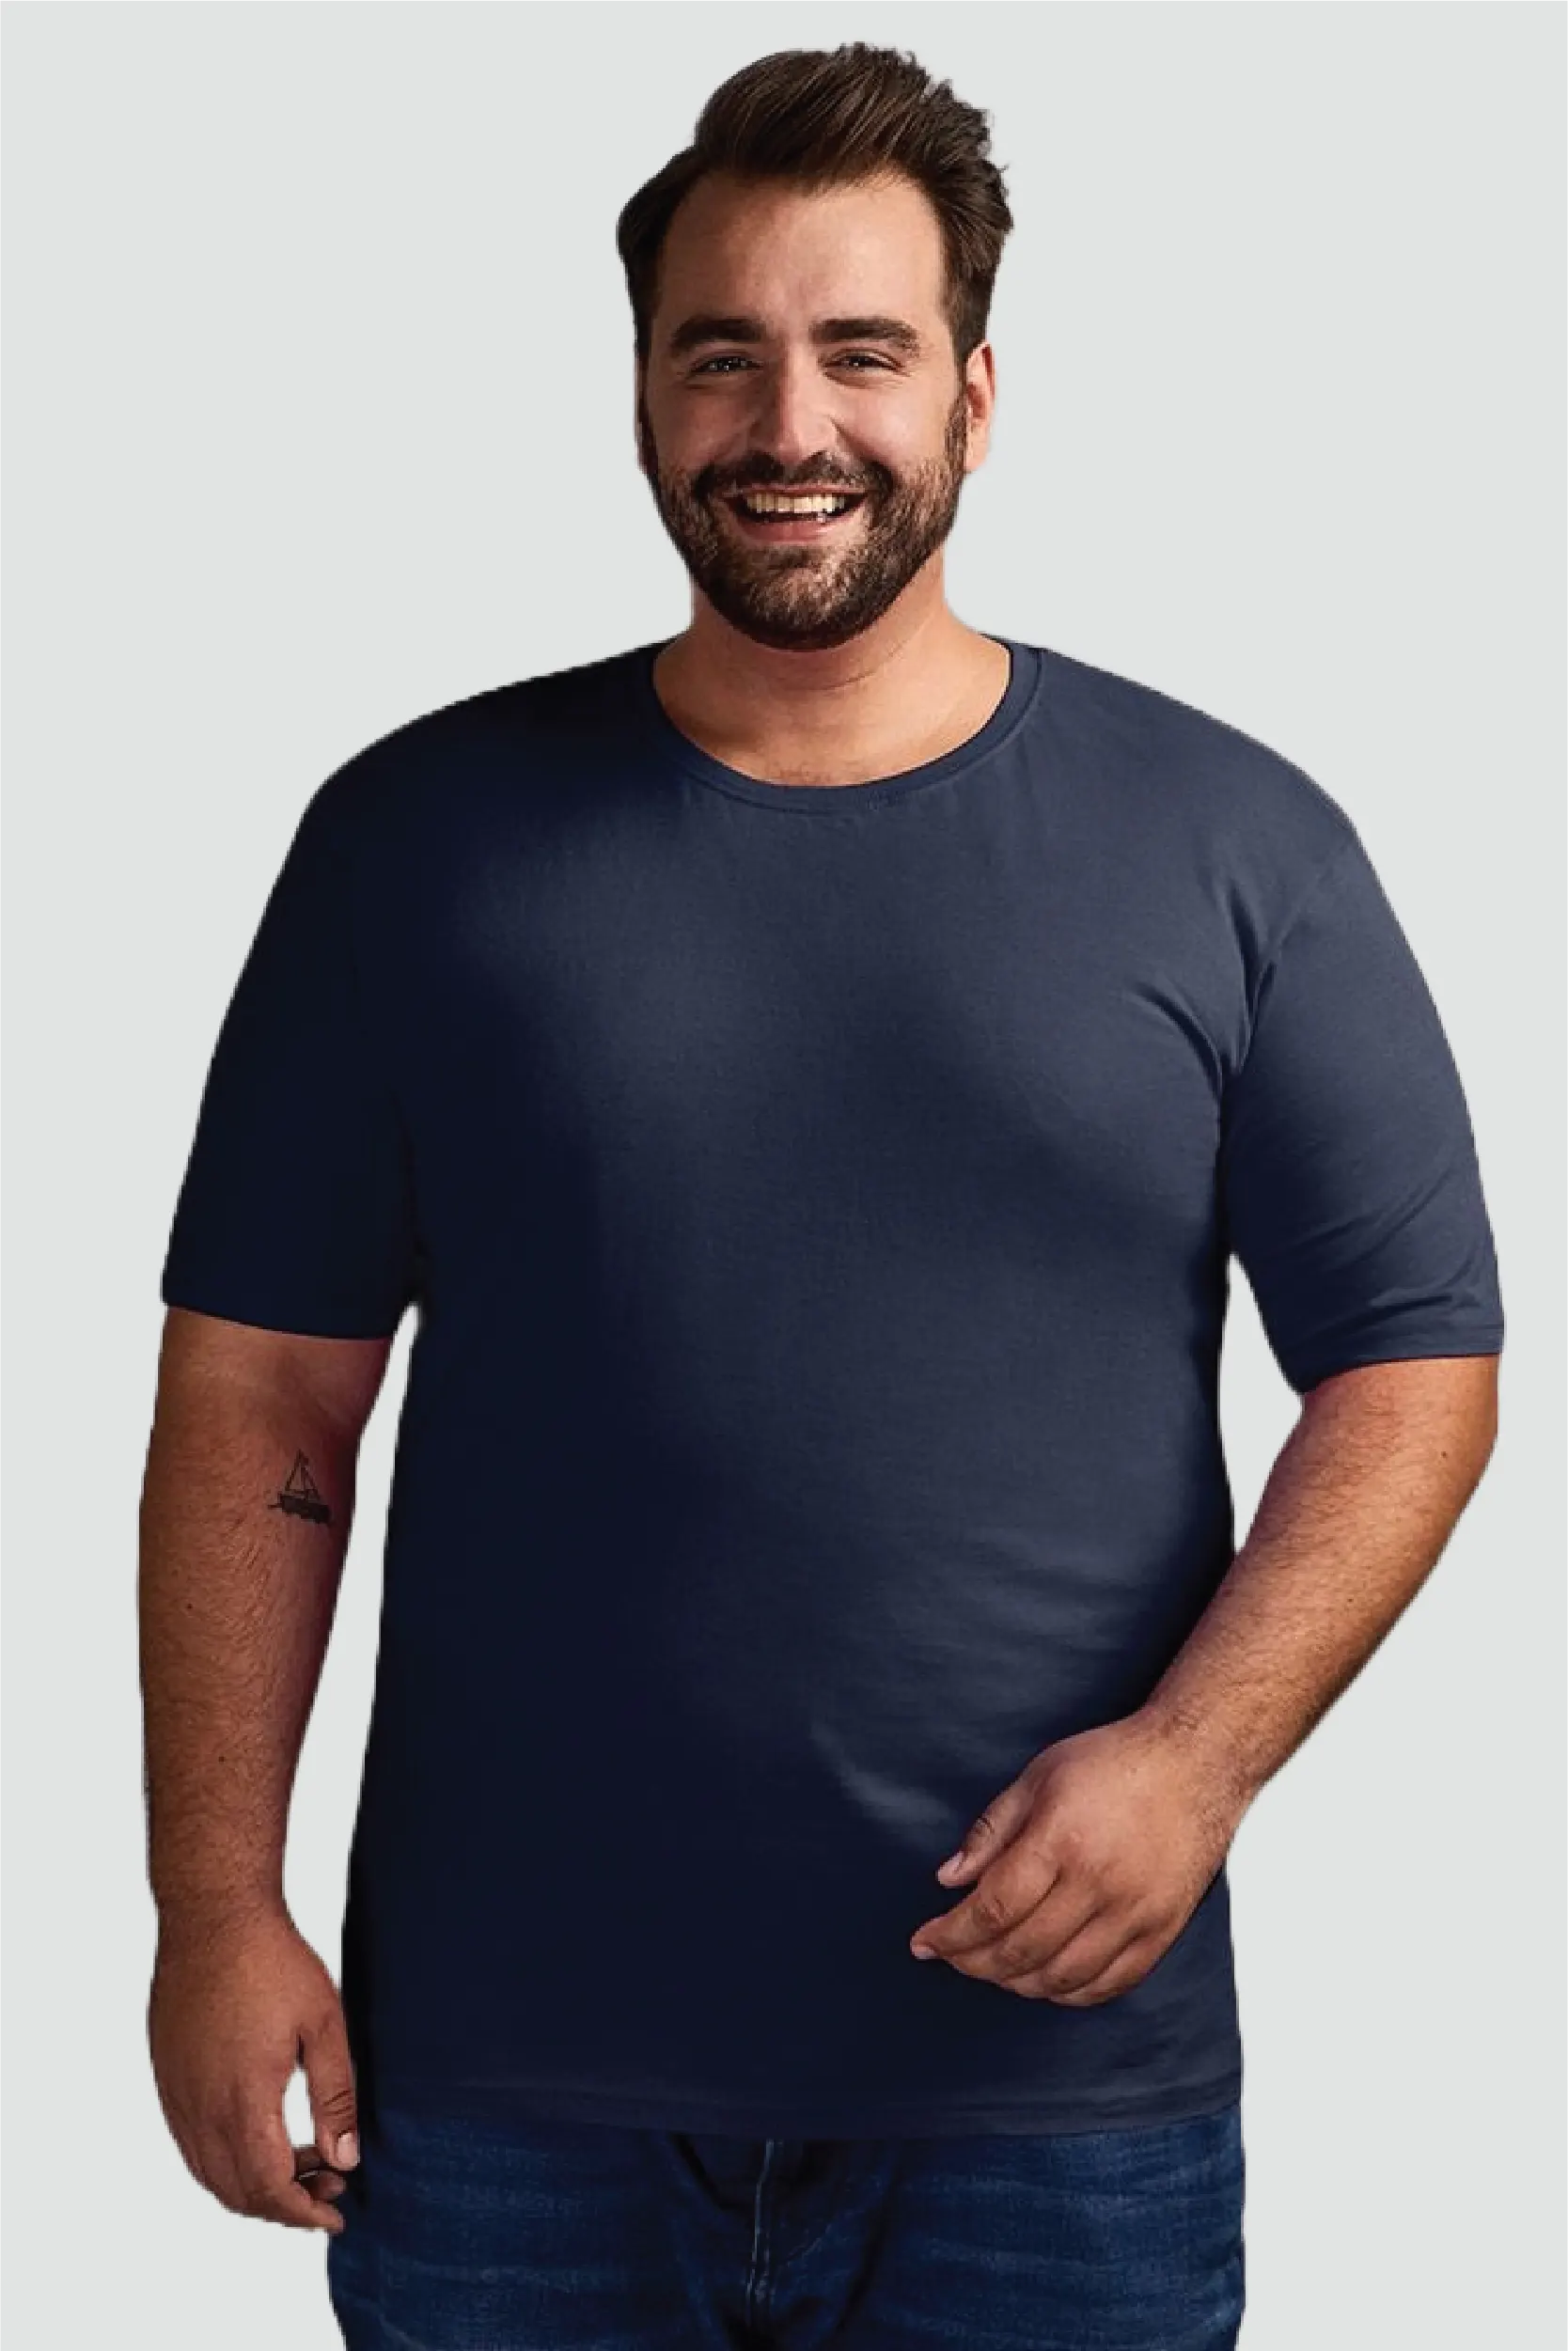 Blank Plus Size T-Shirt Manufacturers